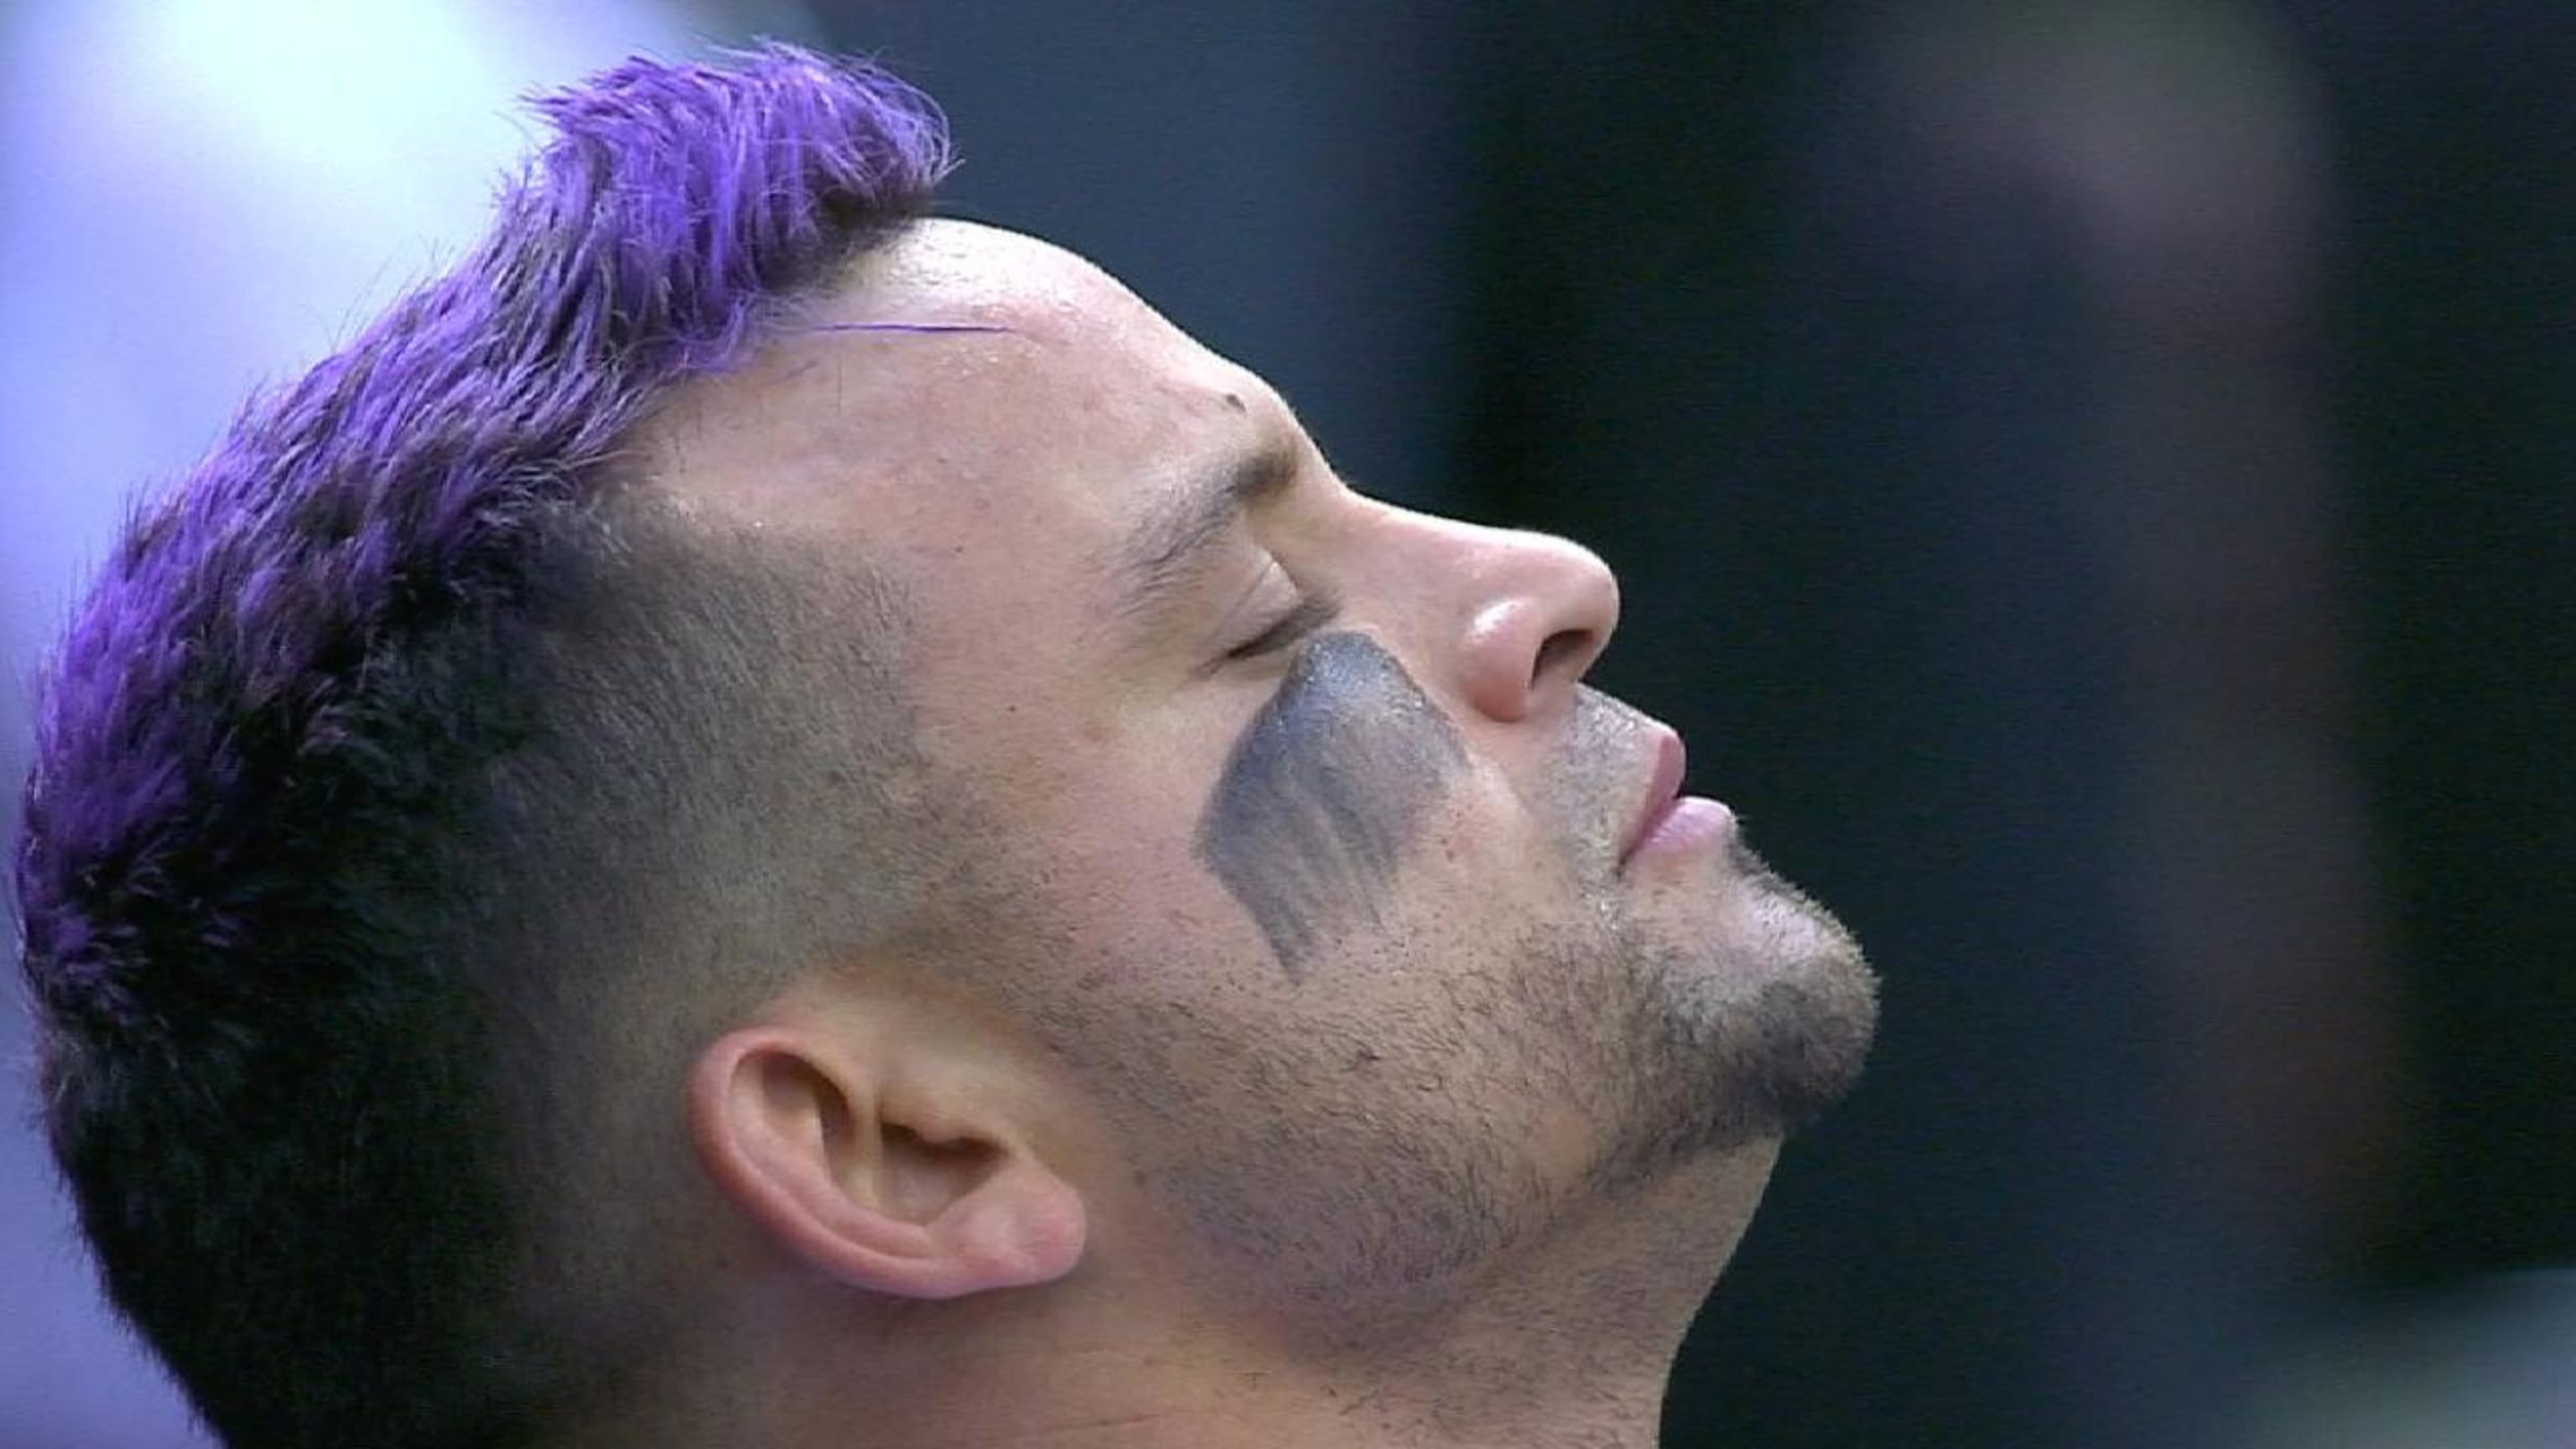 After clinching the Wild Card, Gerardo Parra dyed his hair purple